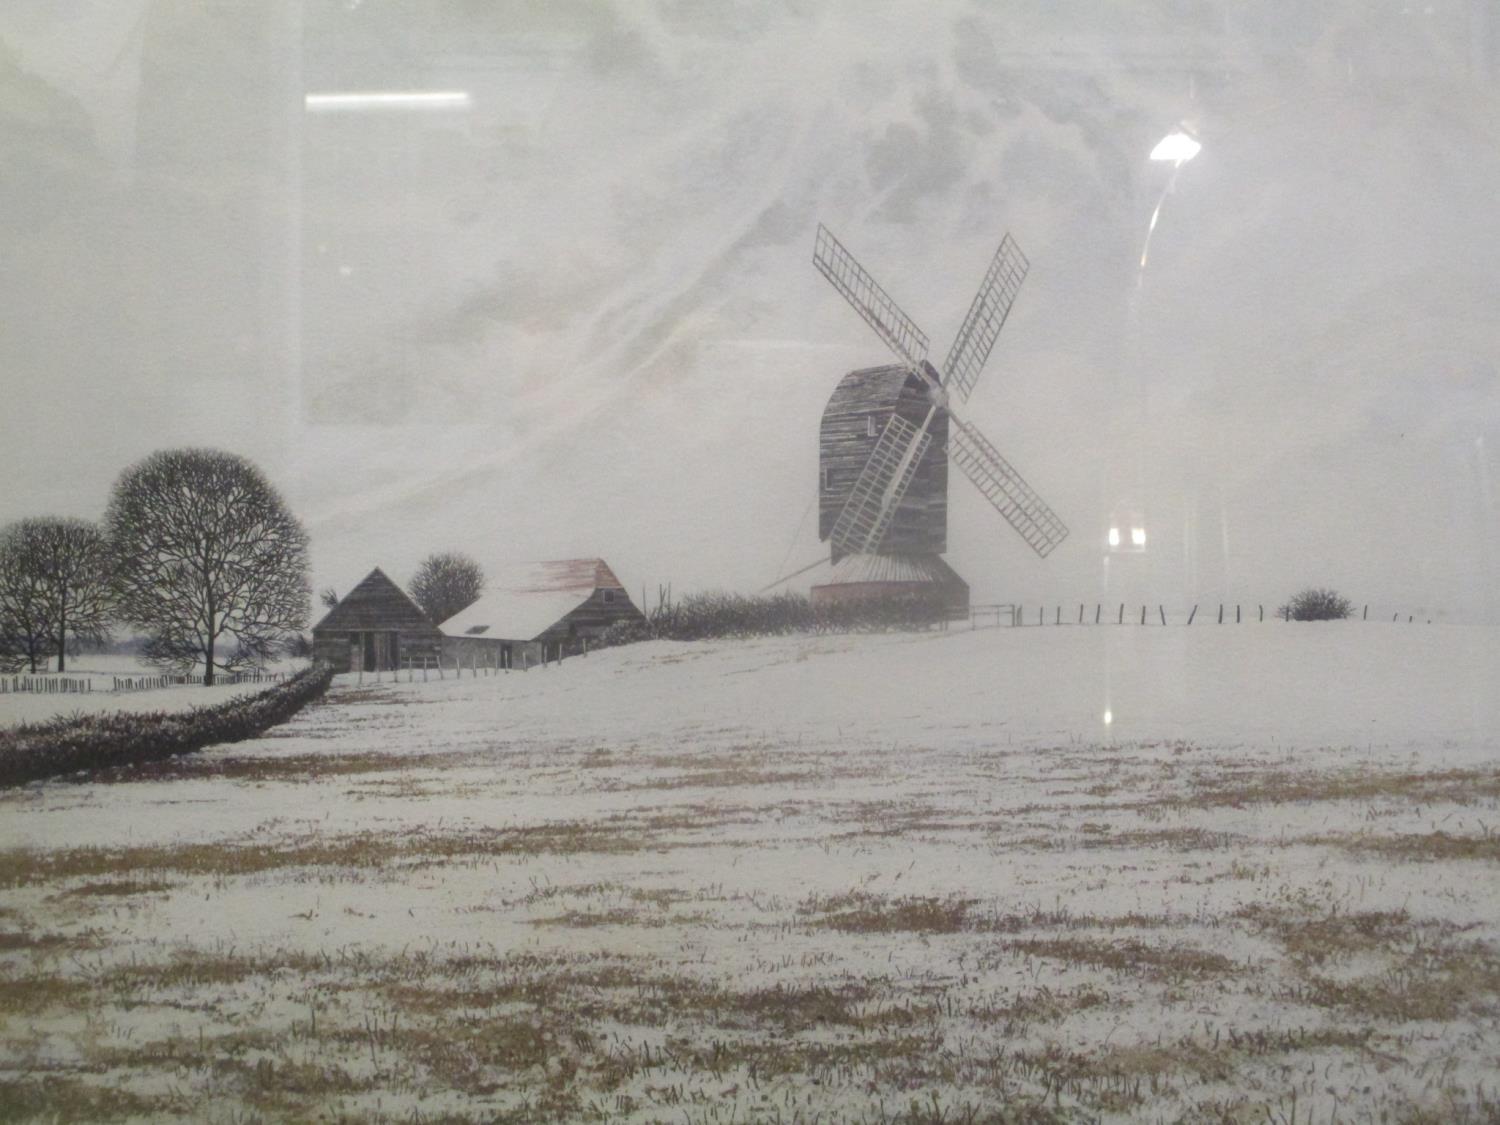 Paul Bisson - a winter landscape with a windmill and barn limited edition print 2/25 signed in